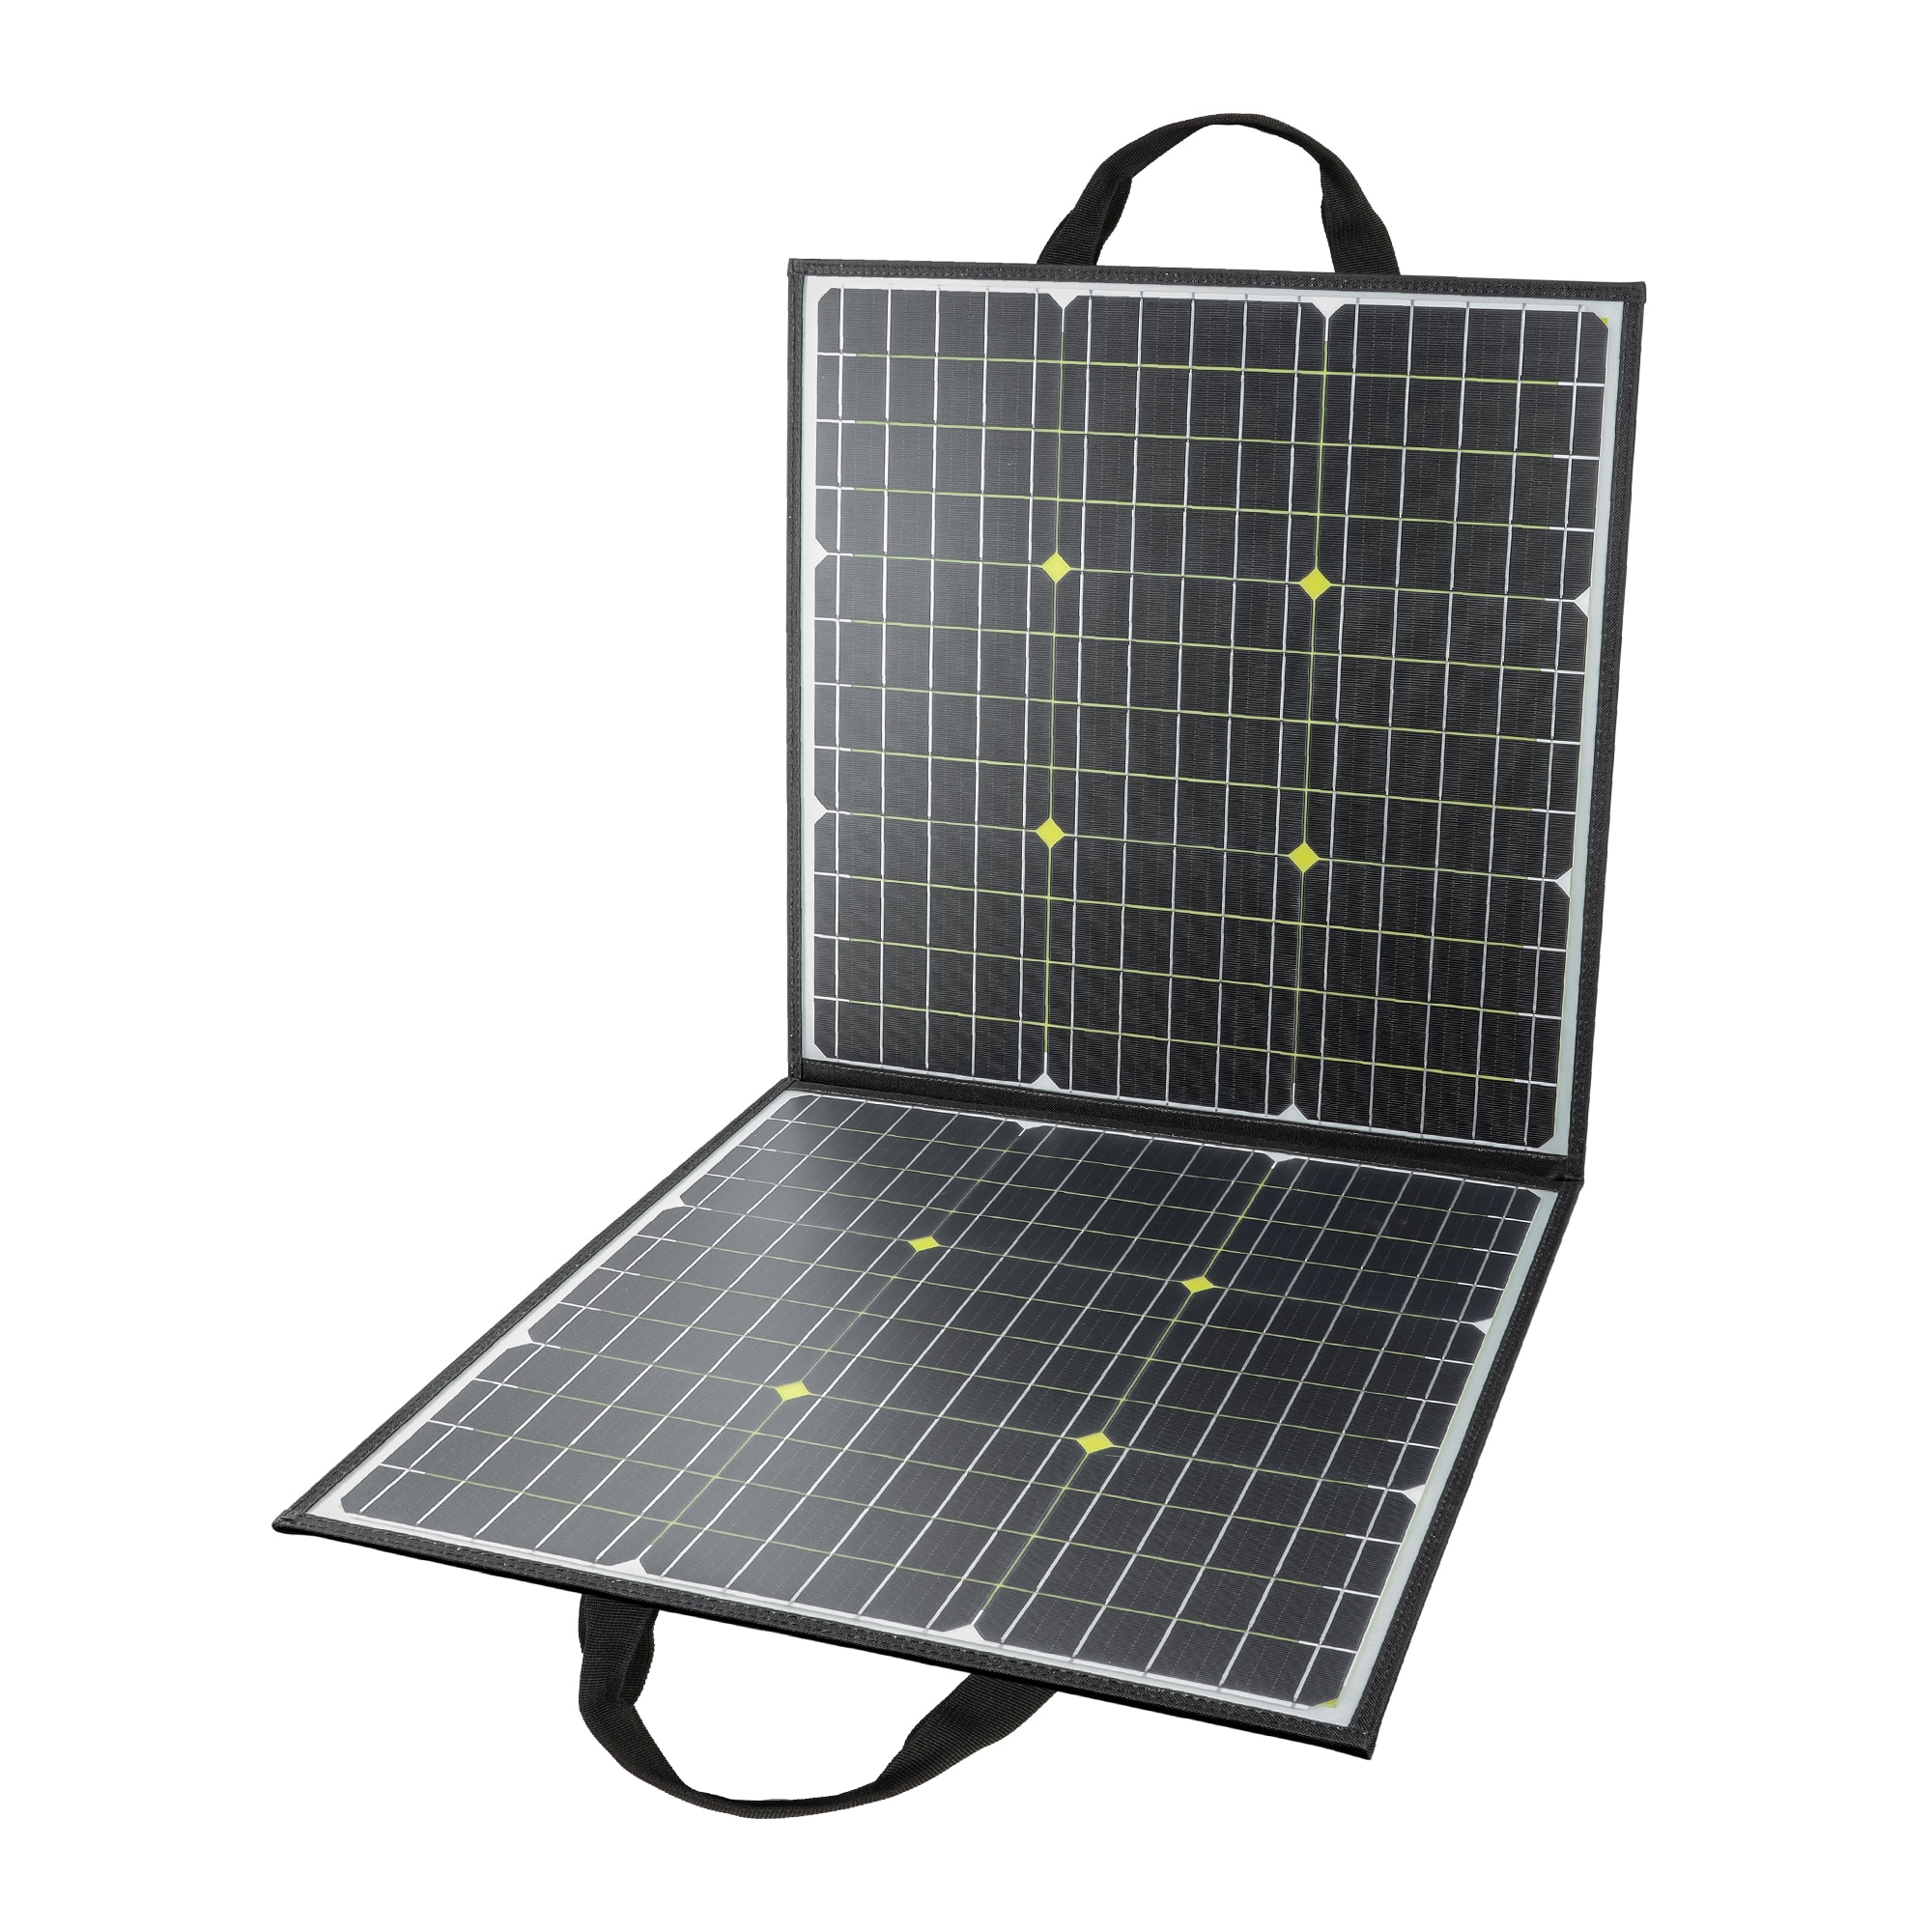 Flashfish Portable Solar Panel 100W 18V Foldable Solar Cells 5V Dual USB Battery Charger Outdoor Power Supply Camping Travel